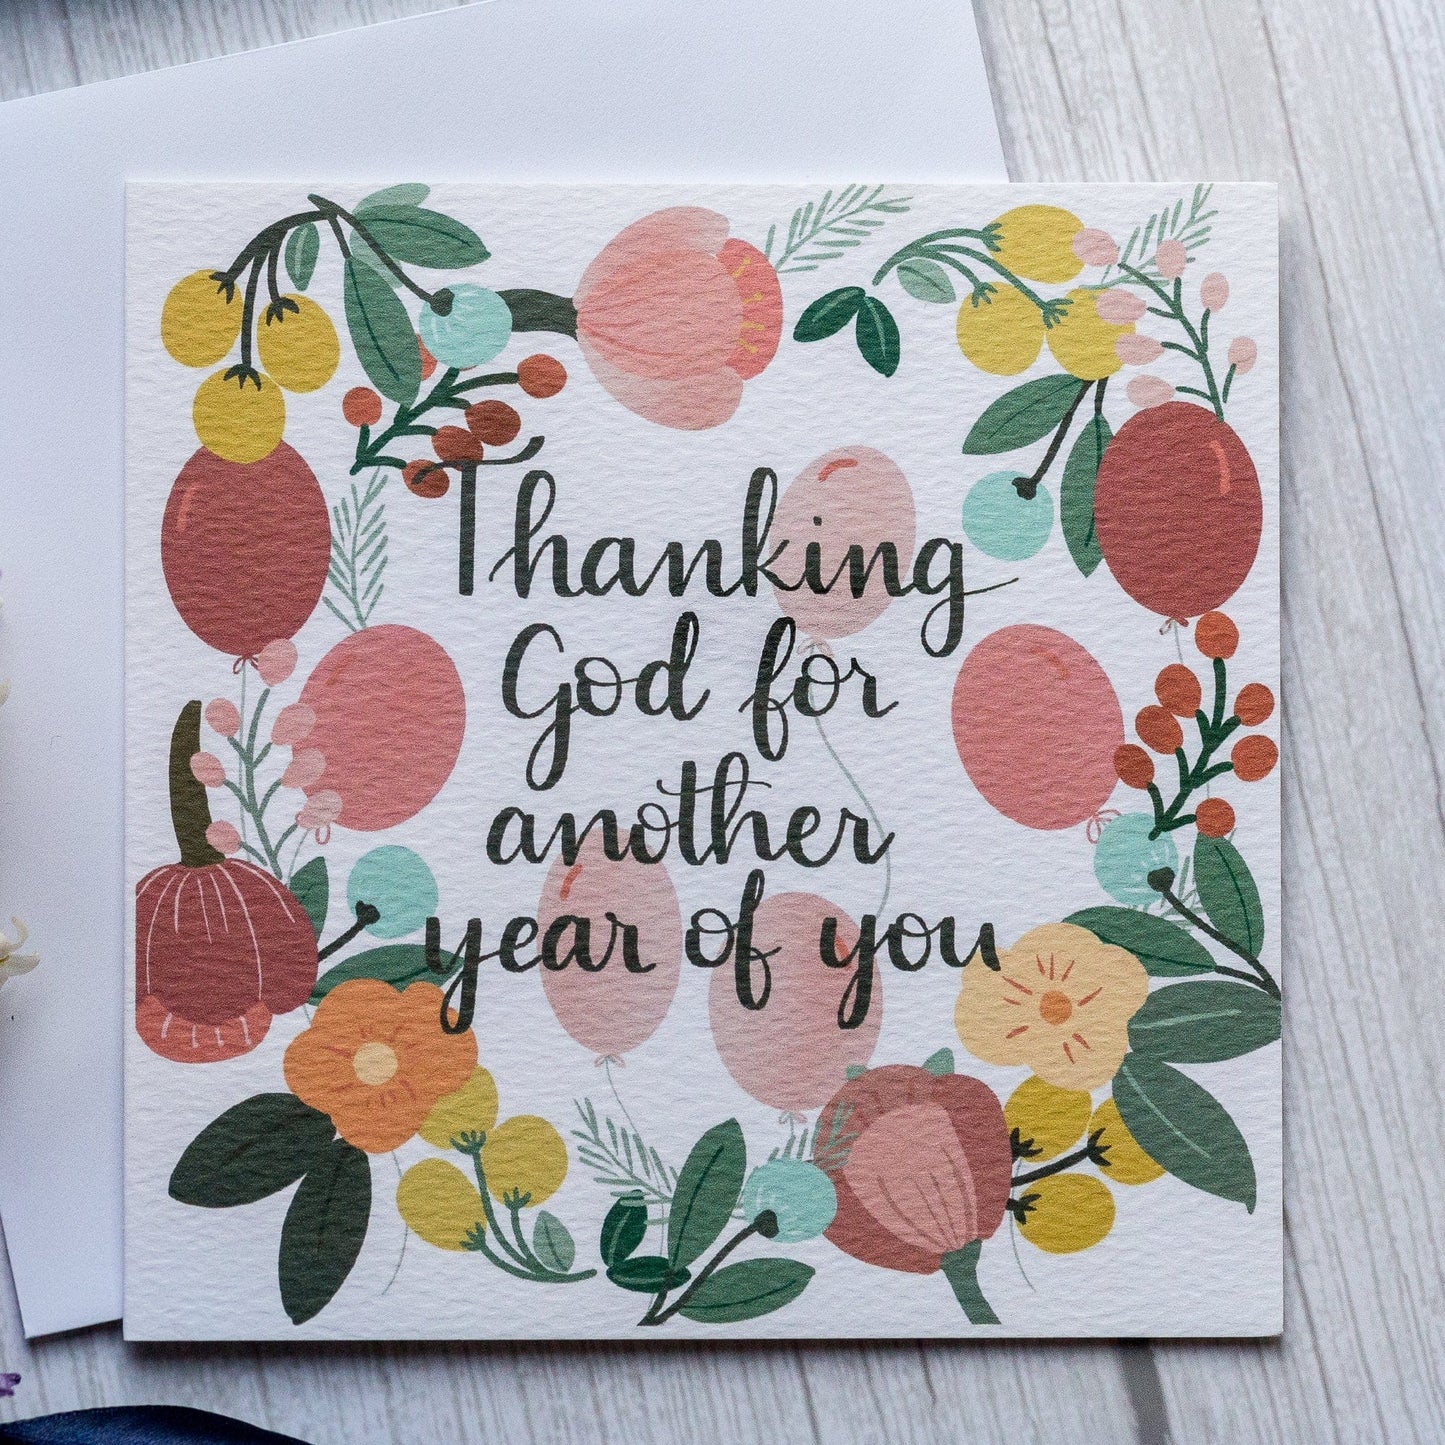 And Hope Designs Cards Thanking God for another year of you birthday card